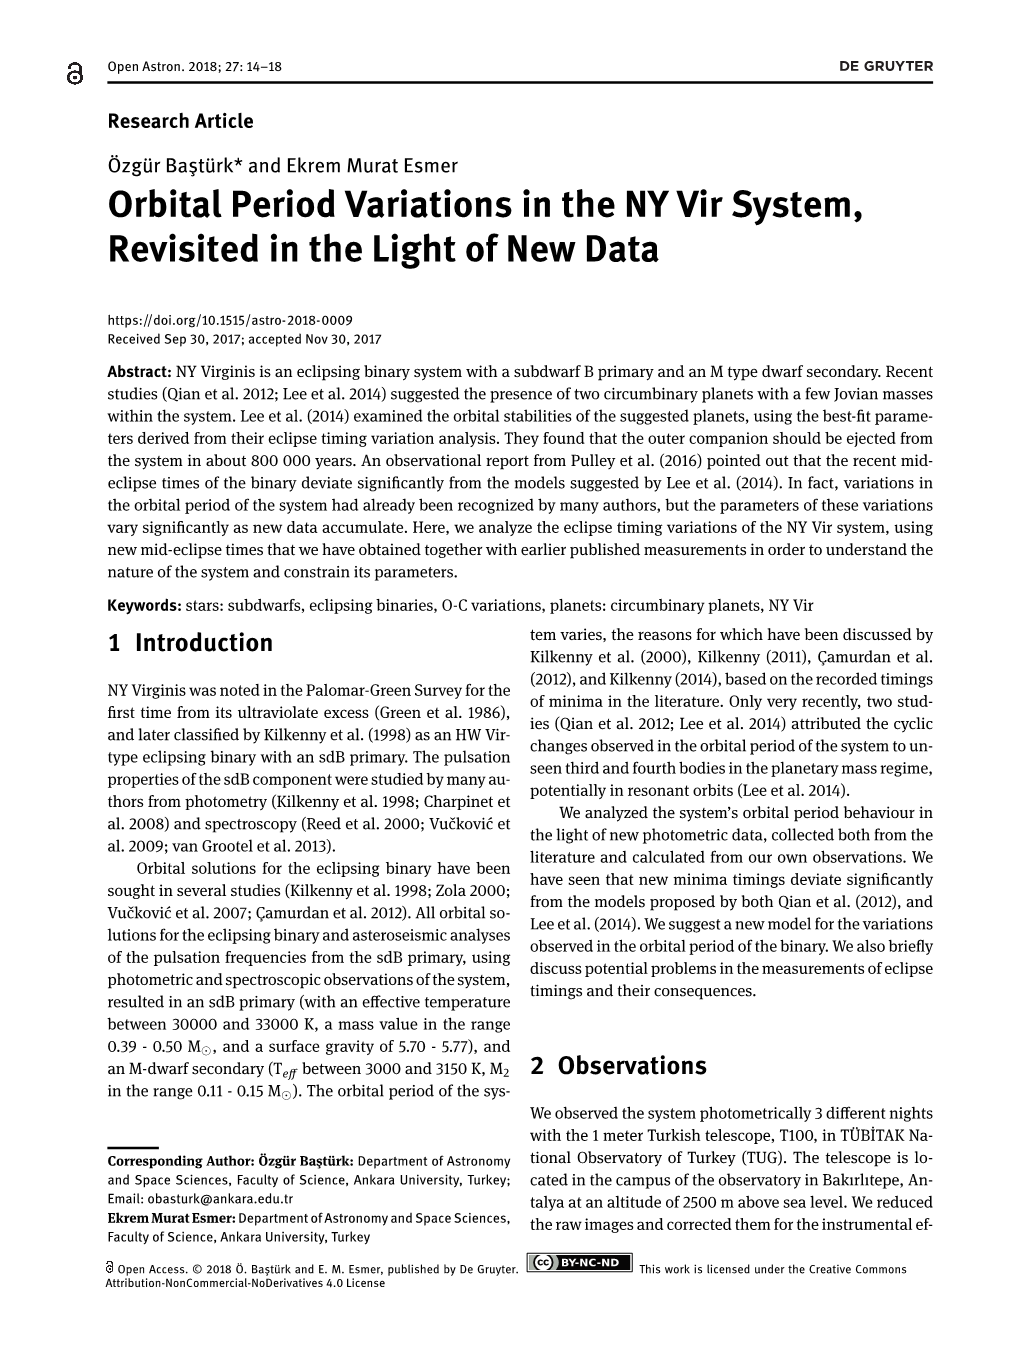 Orbital Period Variations in the NY Vir System, Revisited in the Light of New Data